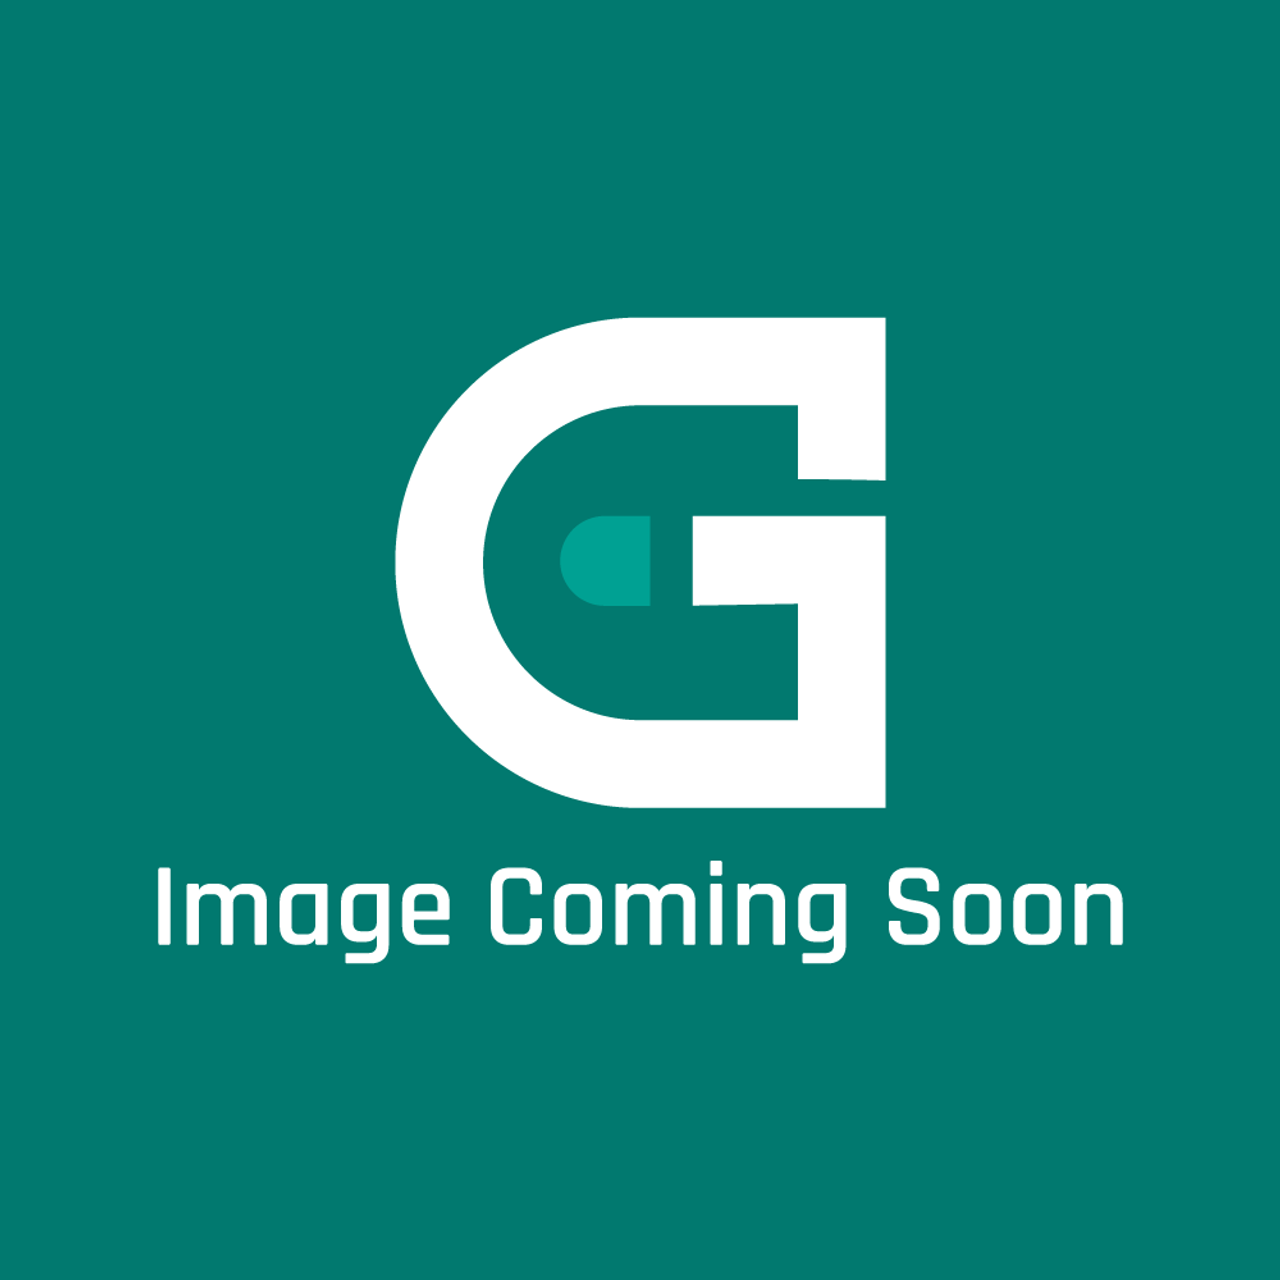 Frigidaire - Electrolux 5304495902 Grate - Image Coming Soon!